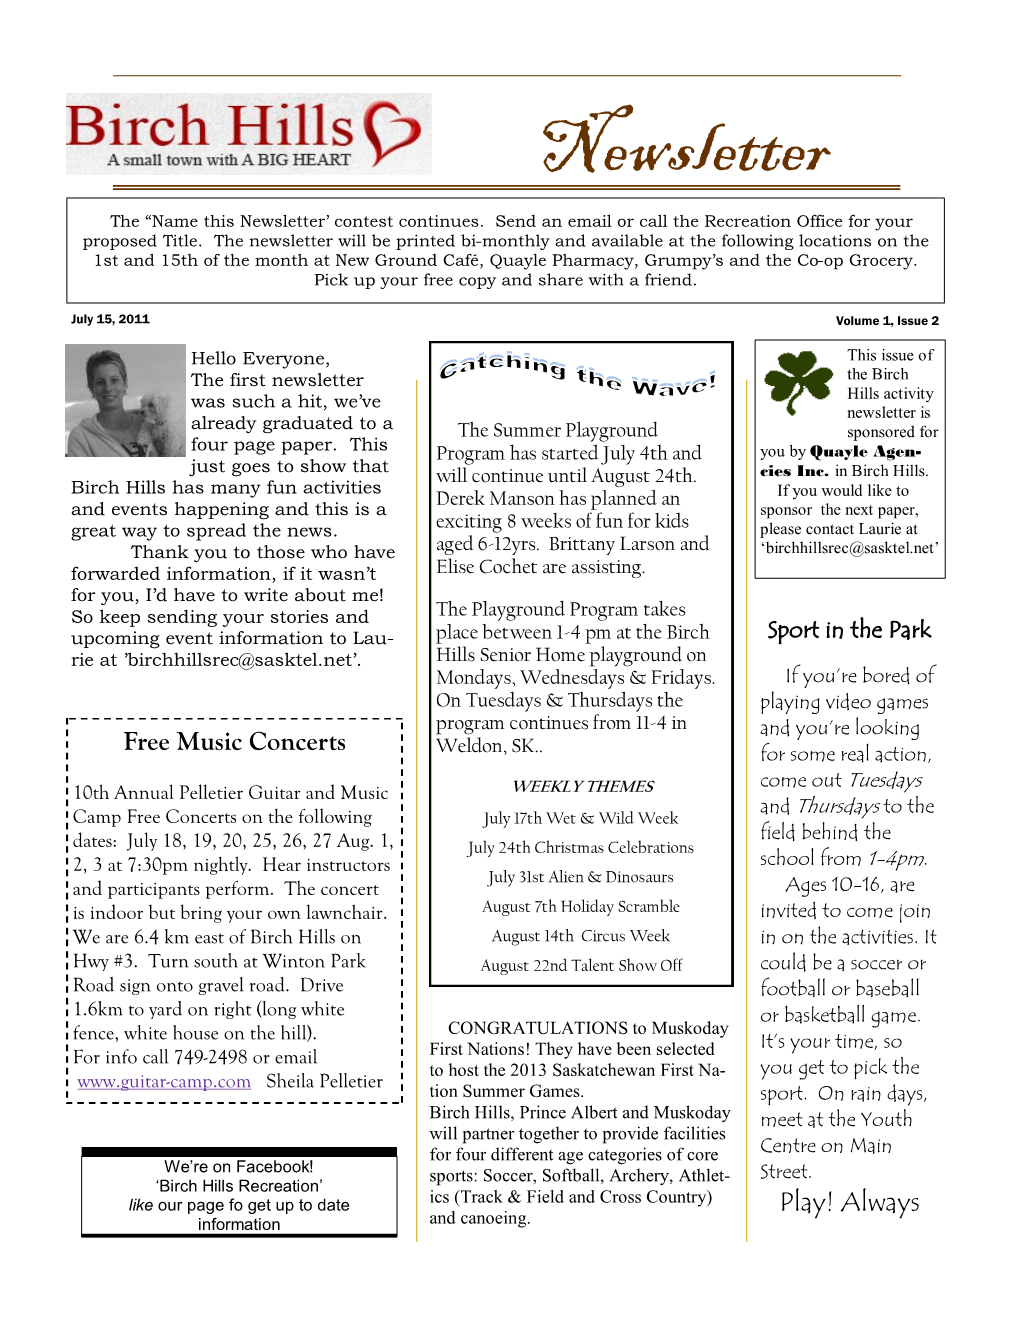 Newsletter the “Name This Newsletter’ Contest Continues